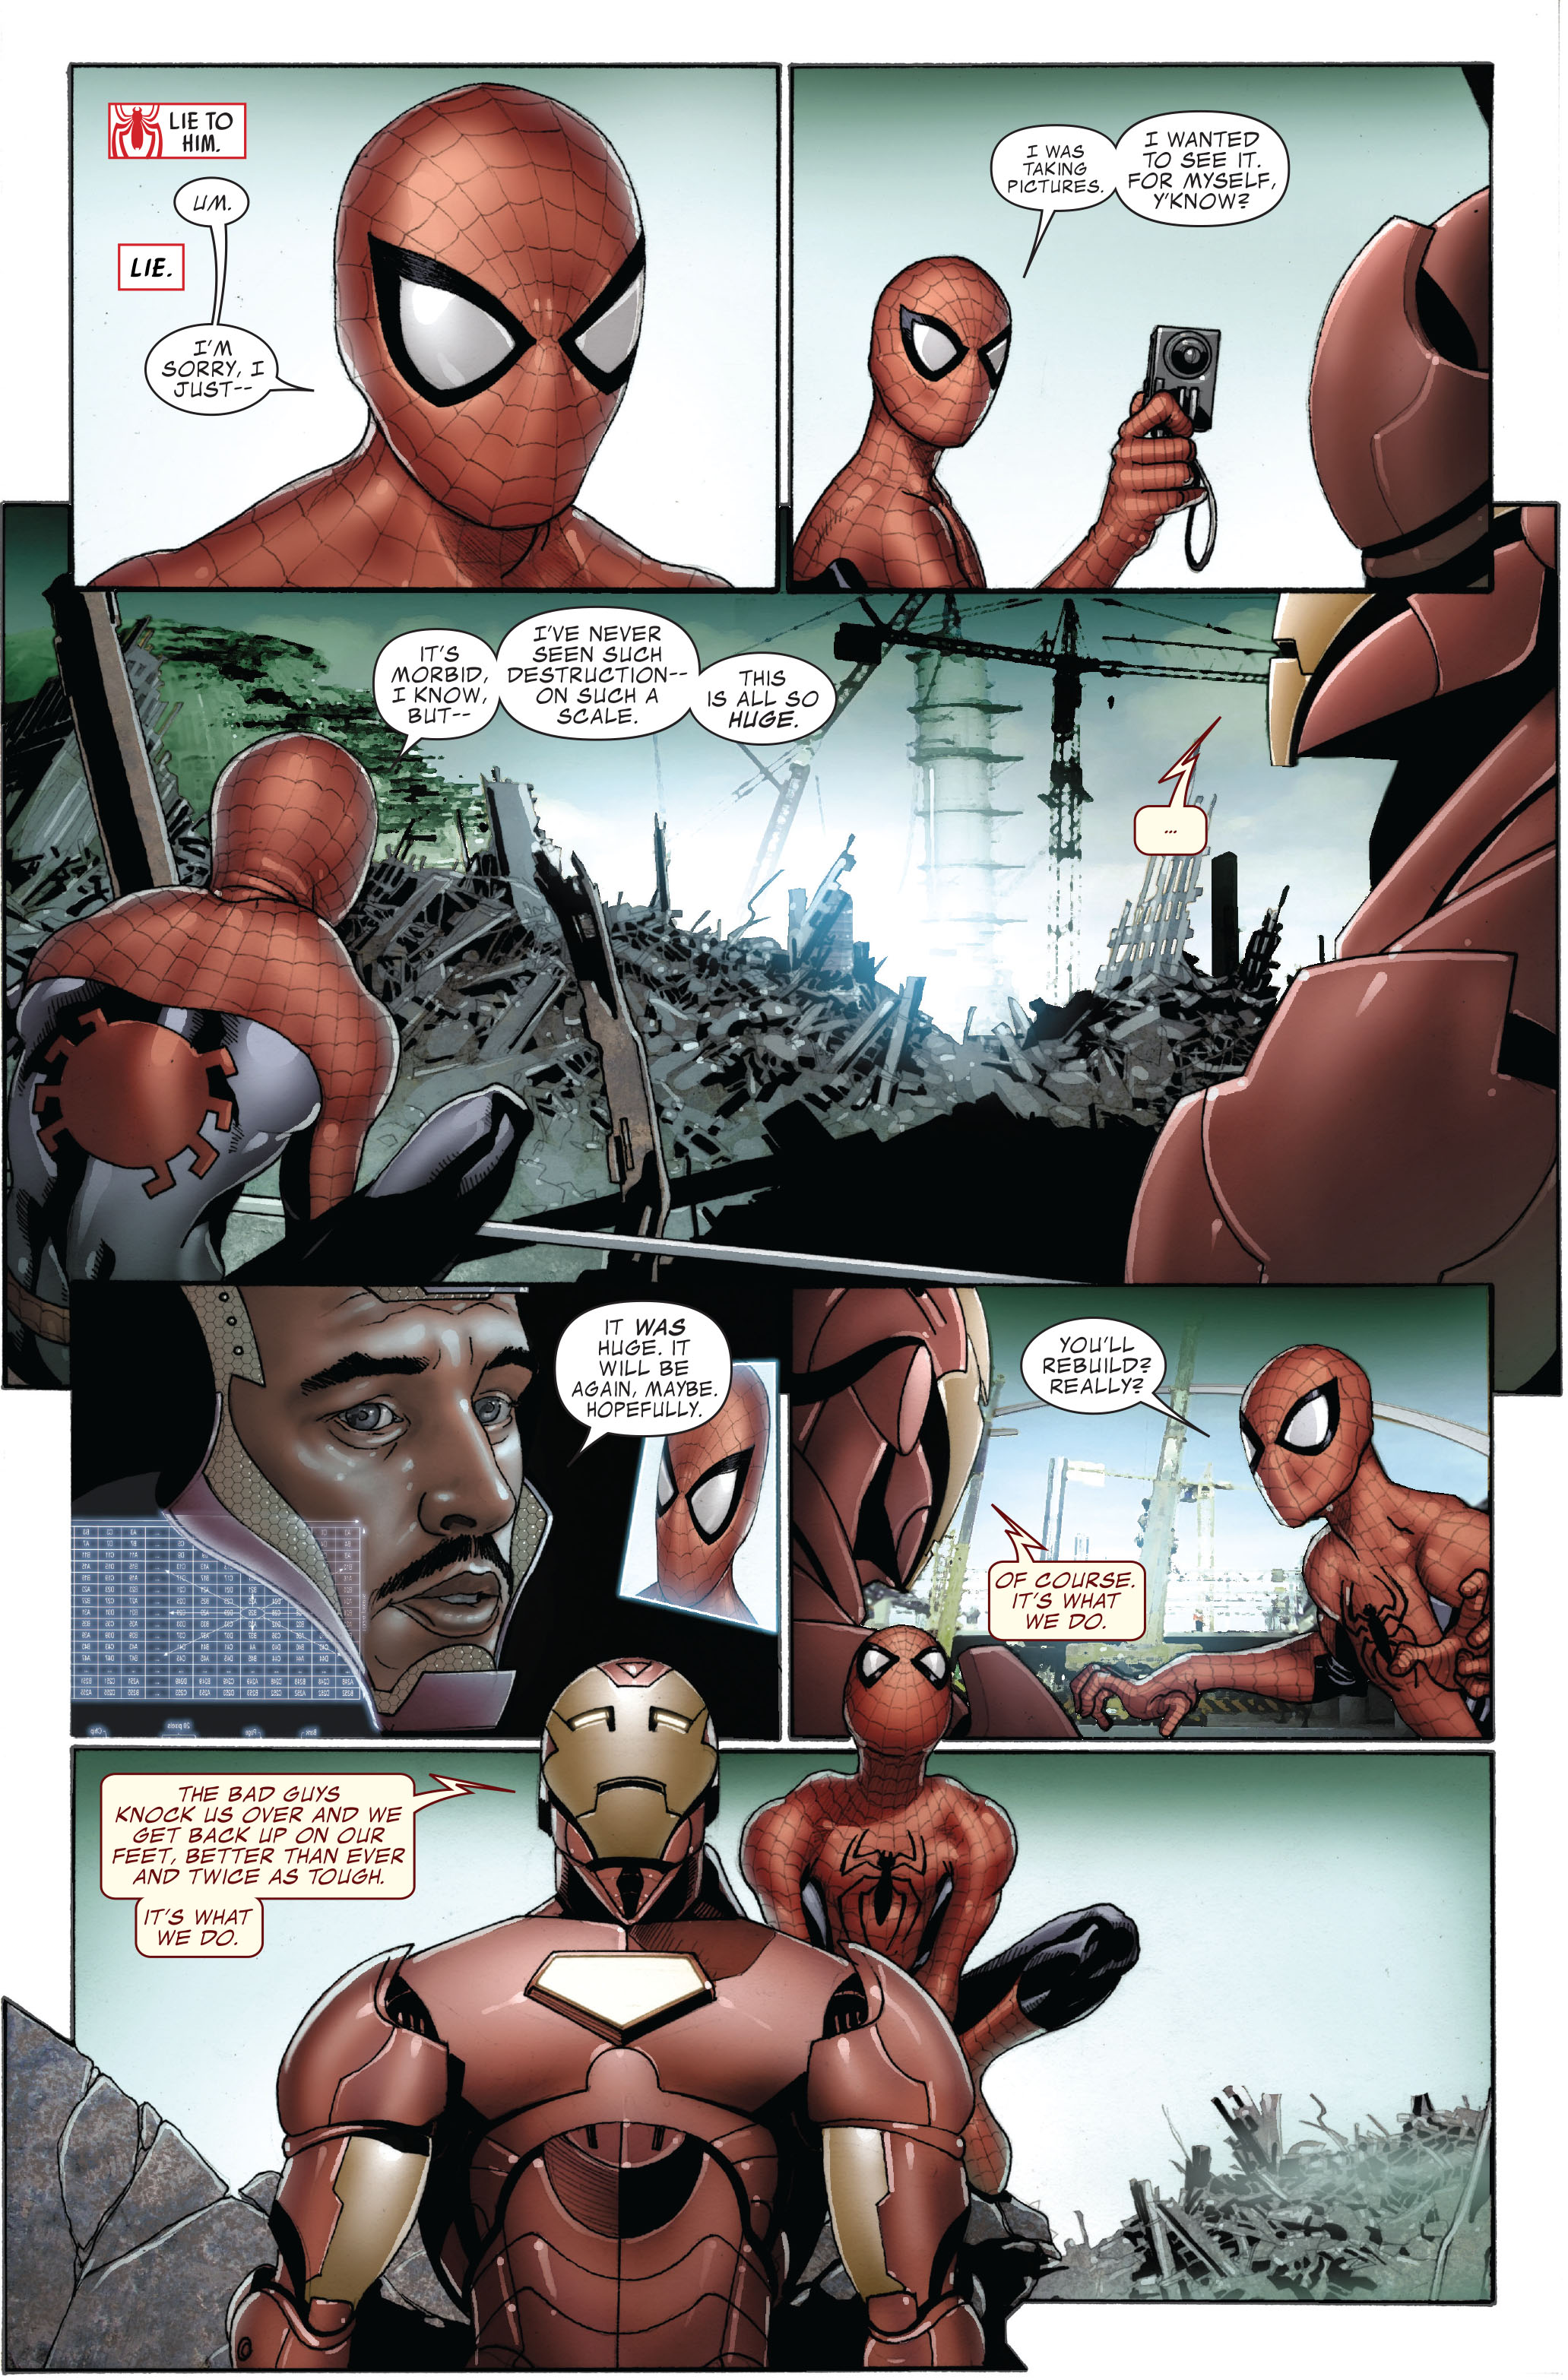 Invincible Iron Man (2008) 7 Page 7